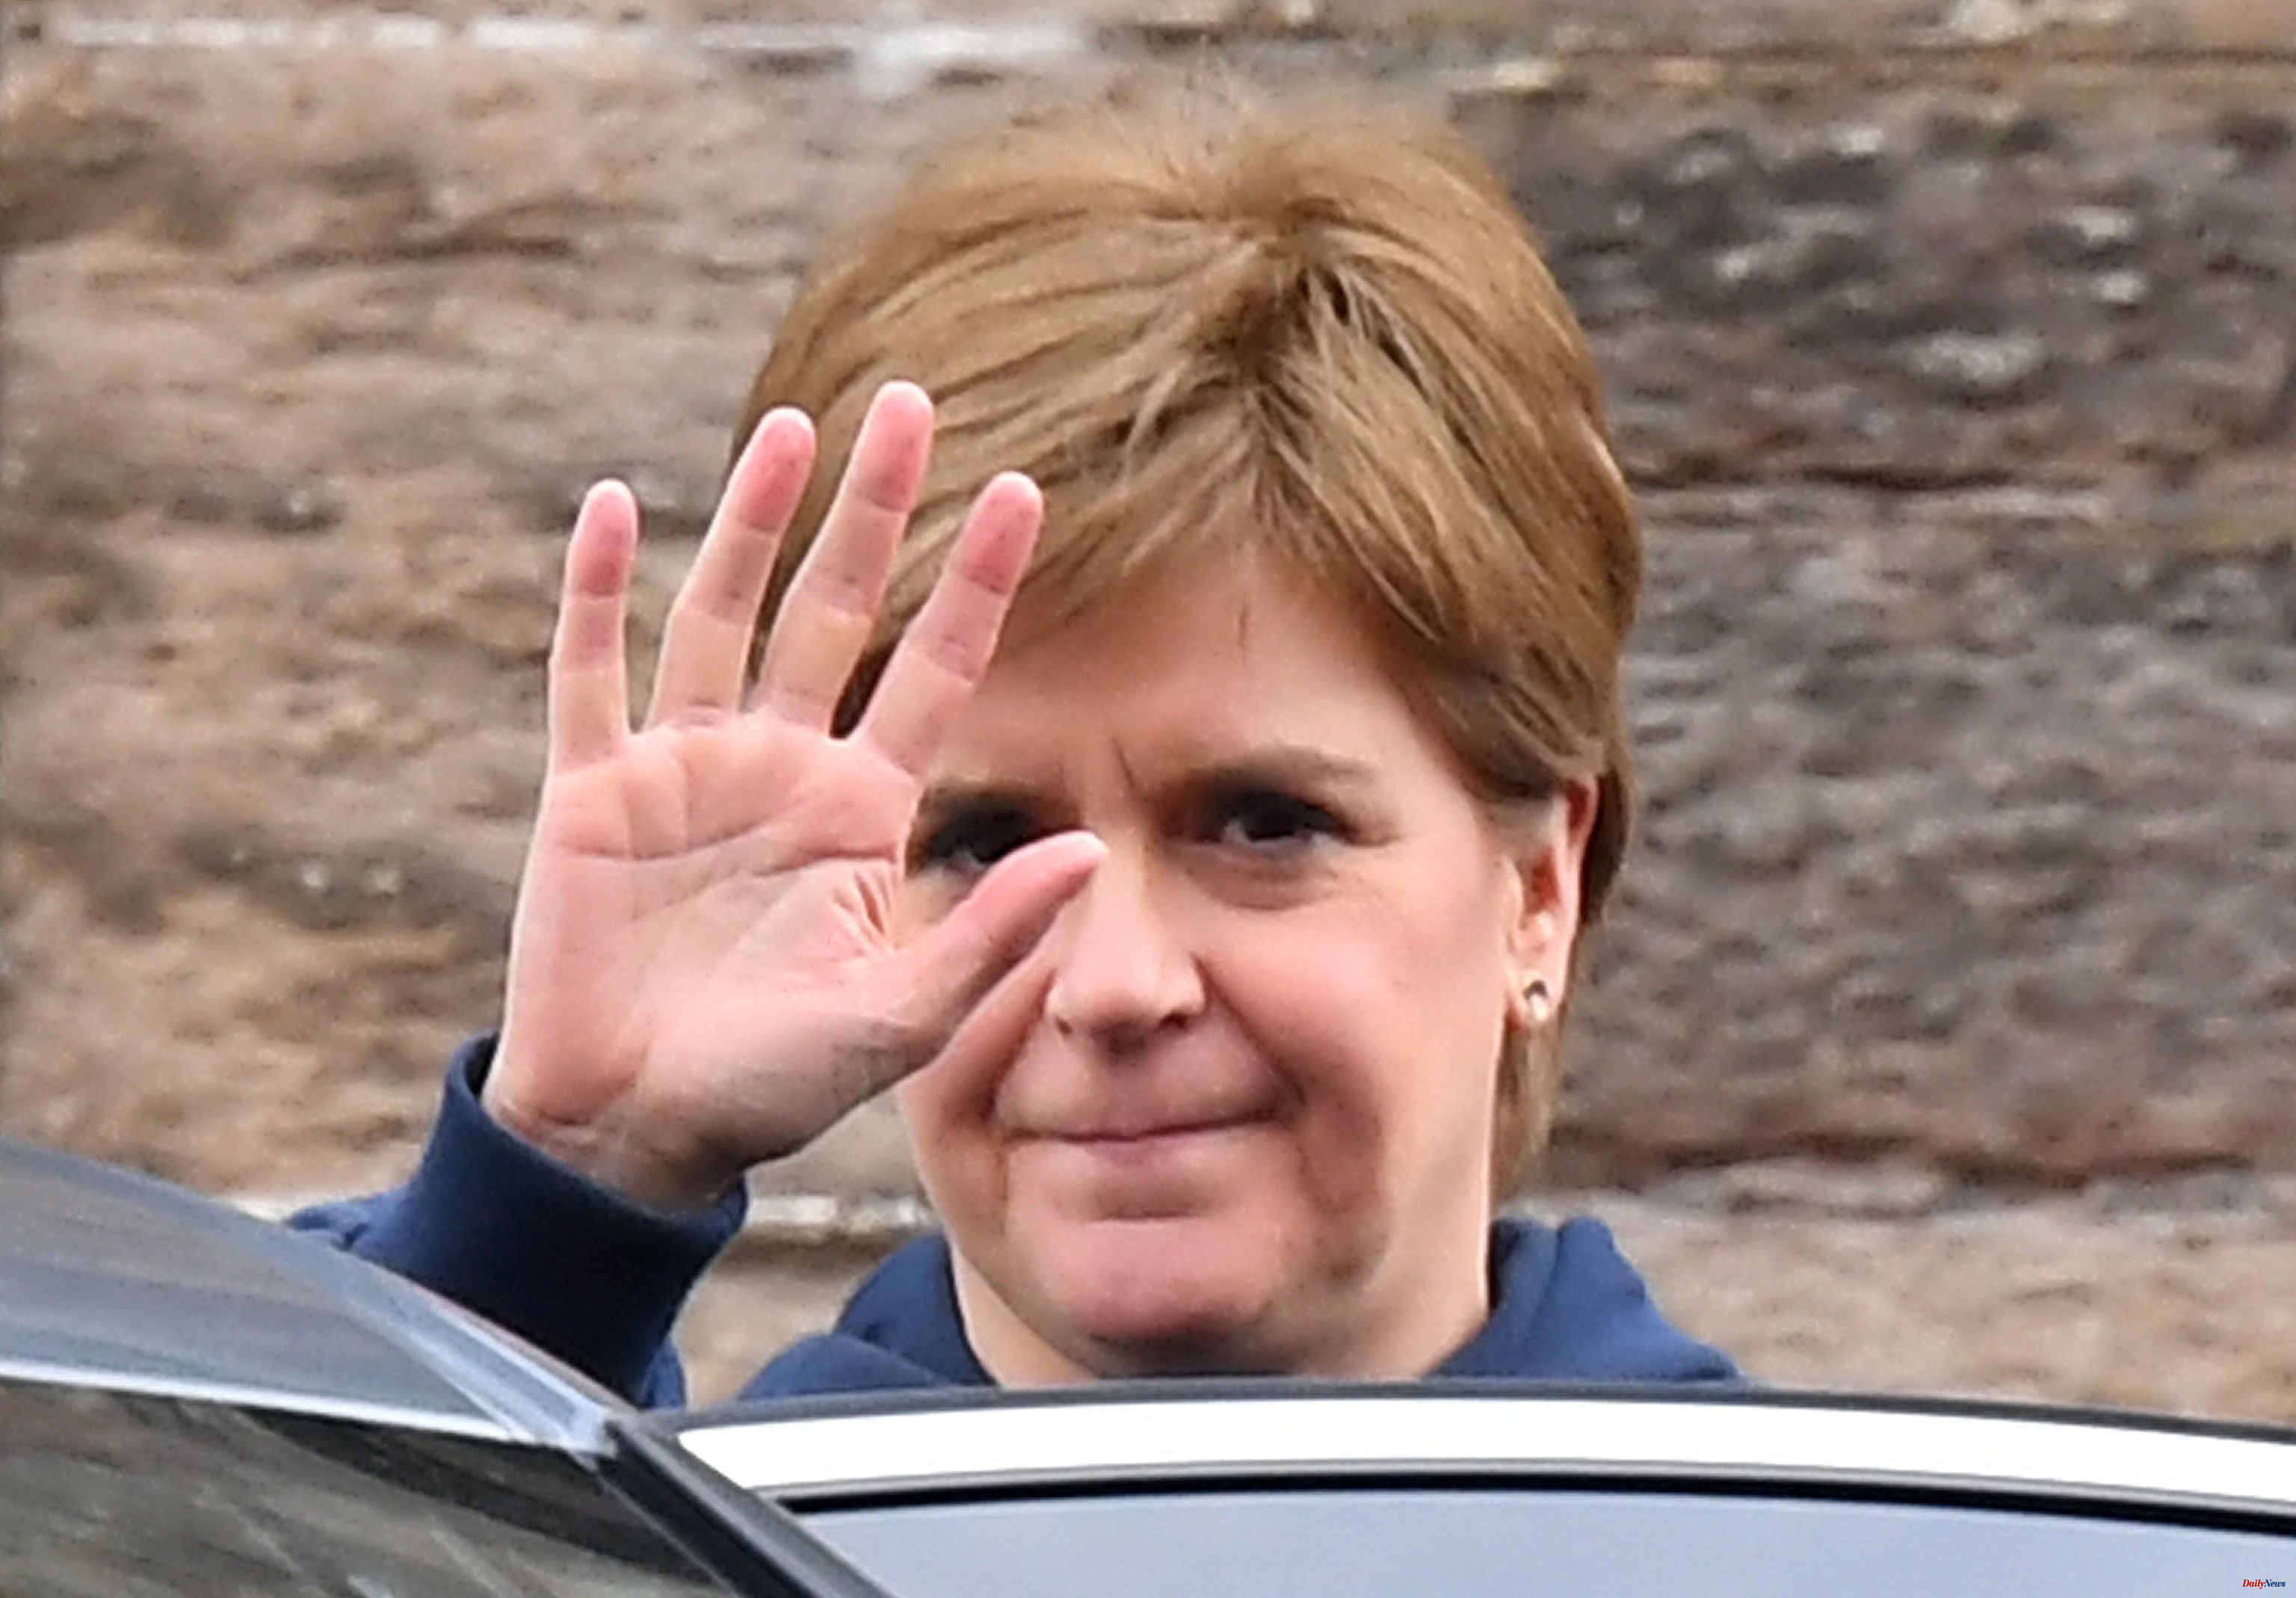 United Kingdom Sturgeon's march forces Scottish independence supporters to redefine their strategy